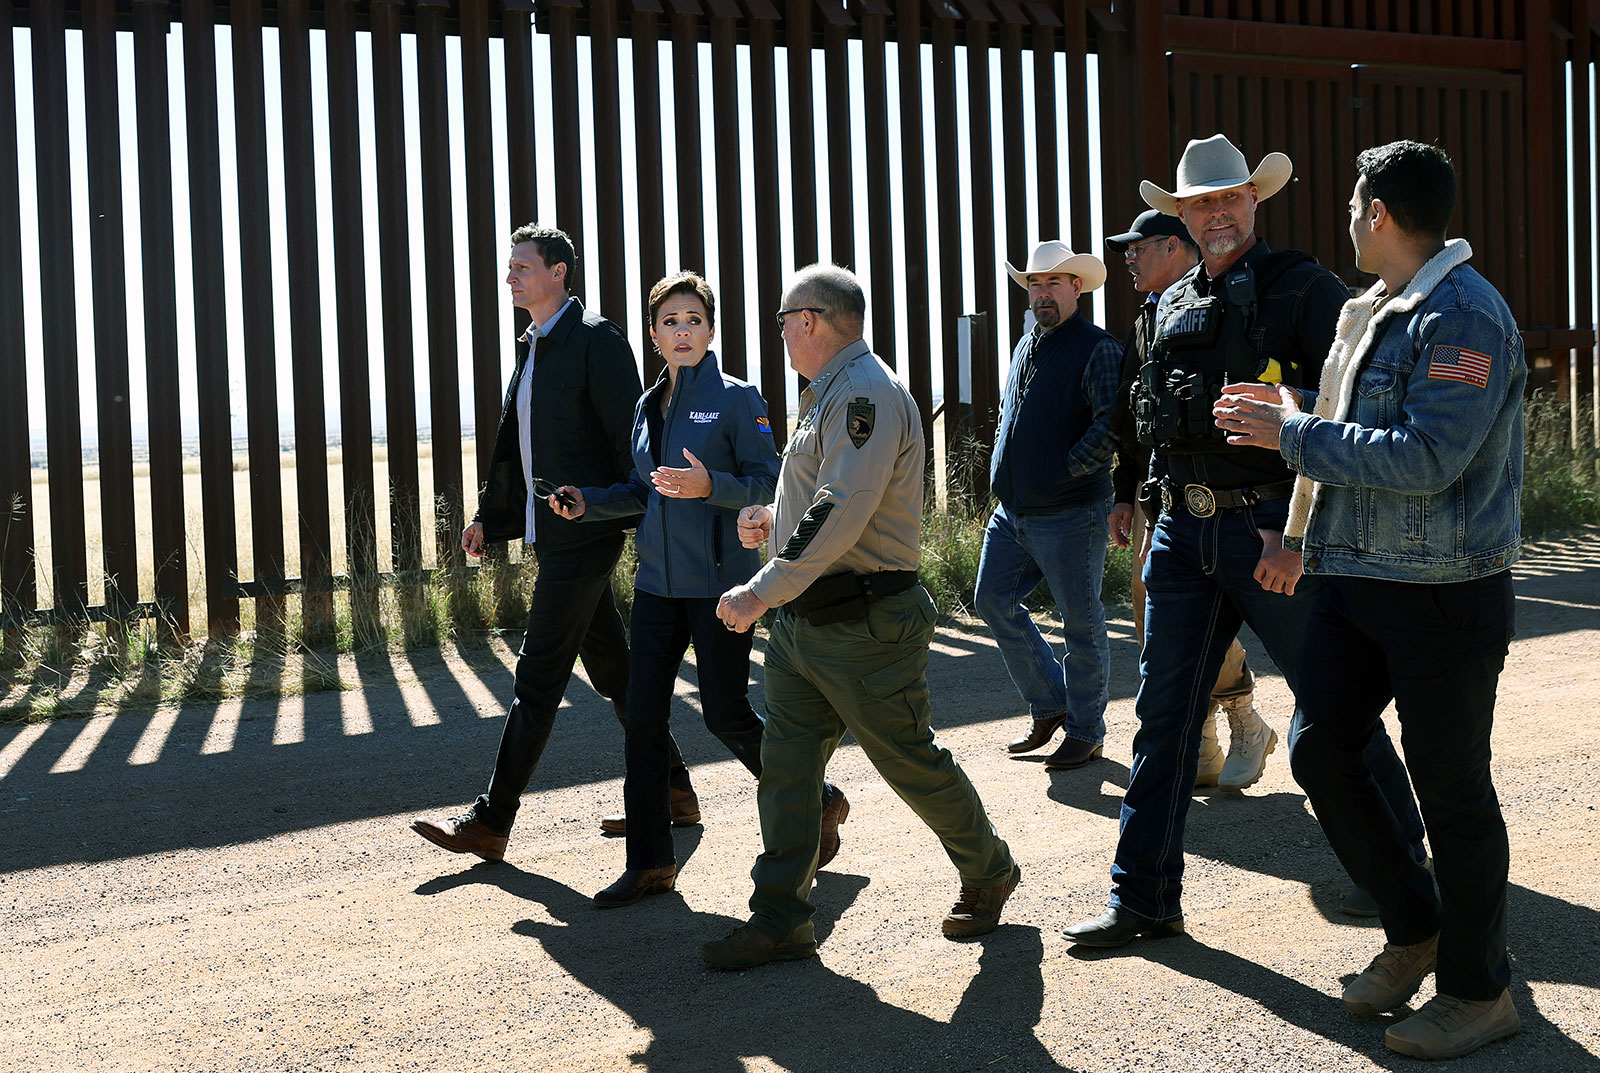 Blake Masters, Kari Lake, Mark Finchem and Abraham Hamadeh walk with Cochise County Sheriff Mark Dannels and other law enforcement along the US-Mexico border in Sierra Vista, Arizona. 